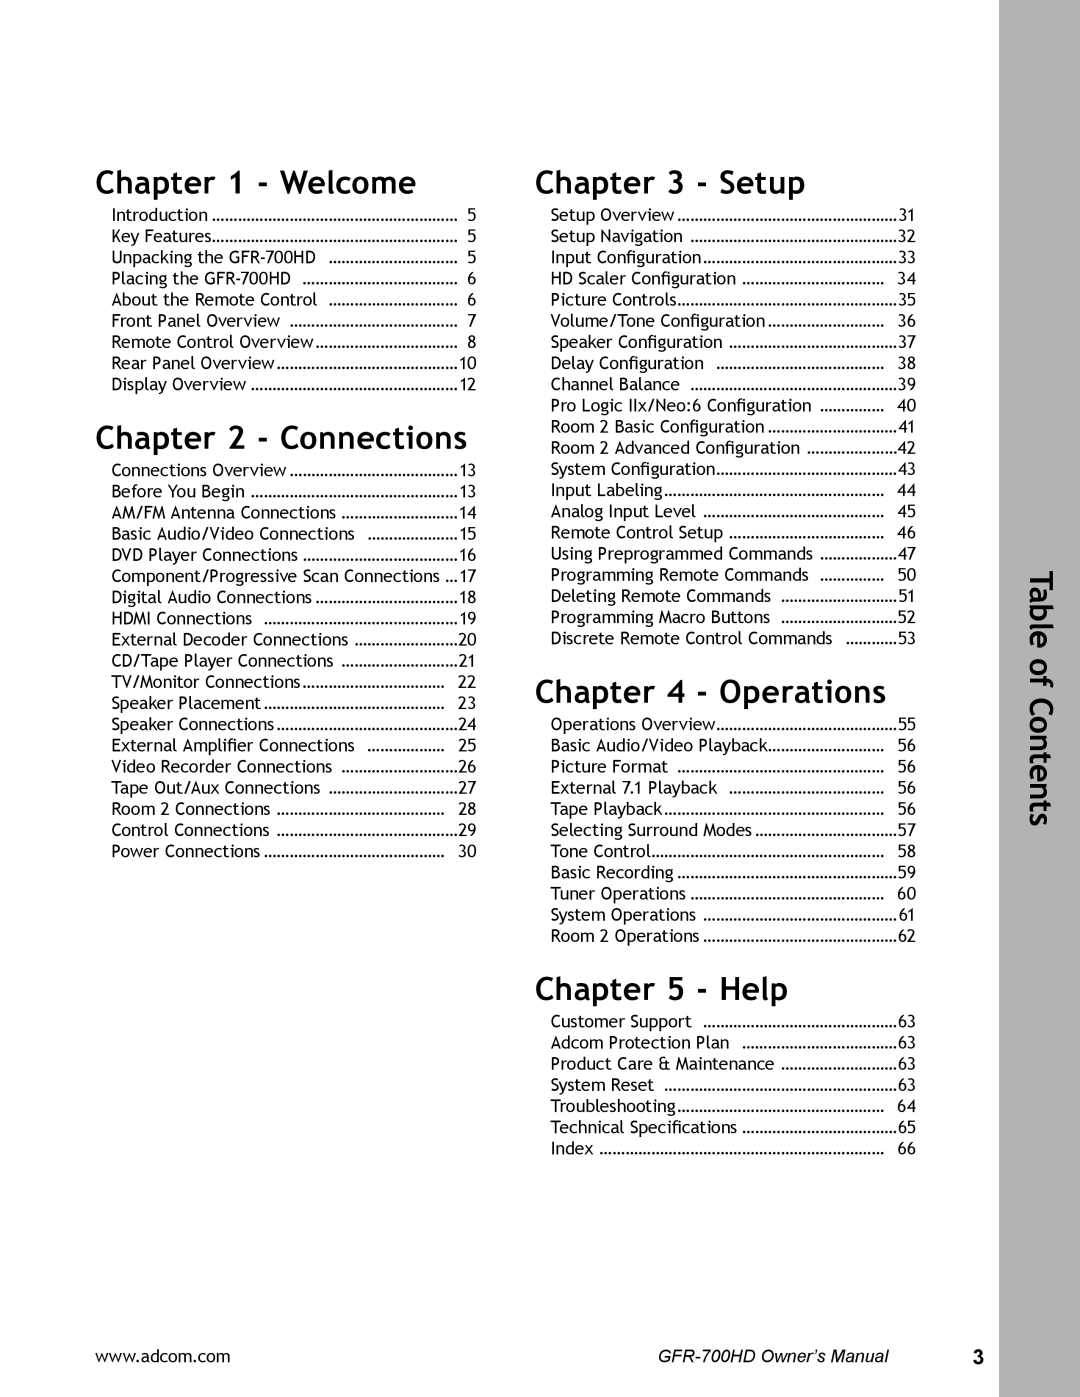 Adcom GFR-700HD user manual Welcome, Connections, Setup, Operations, Help, Table of Contents 